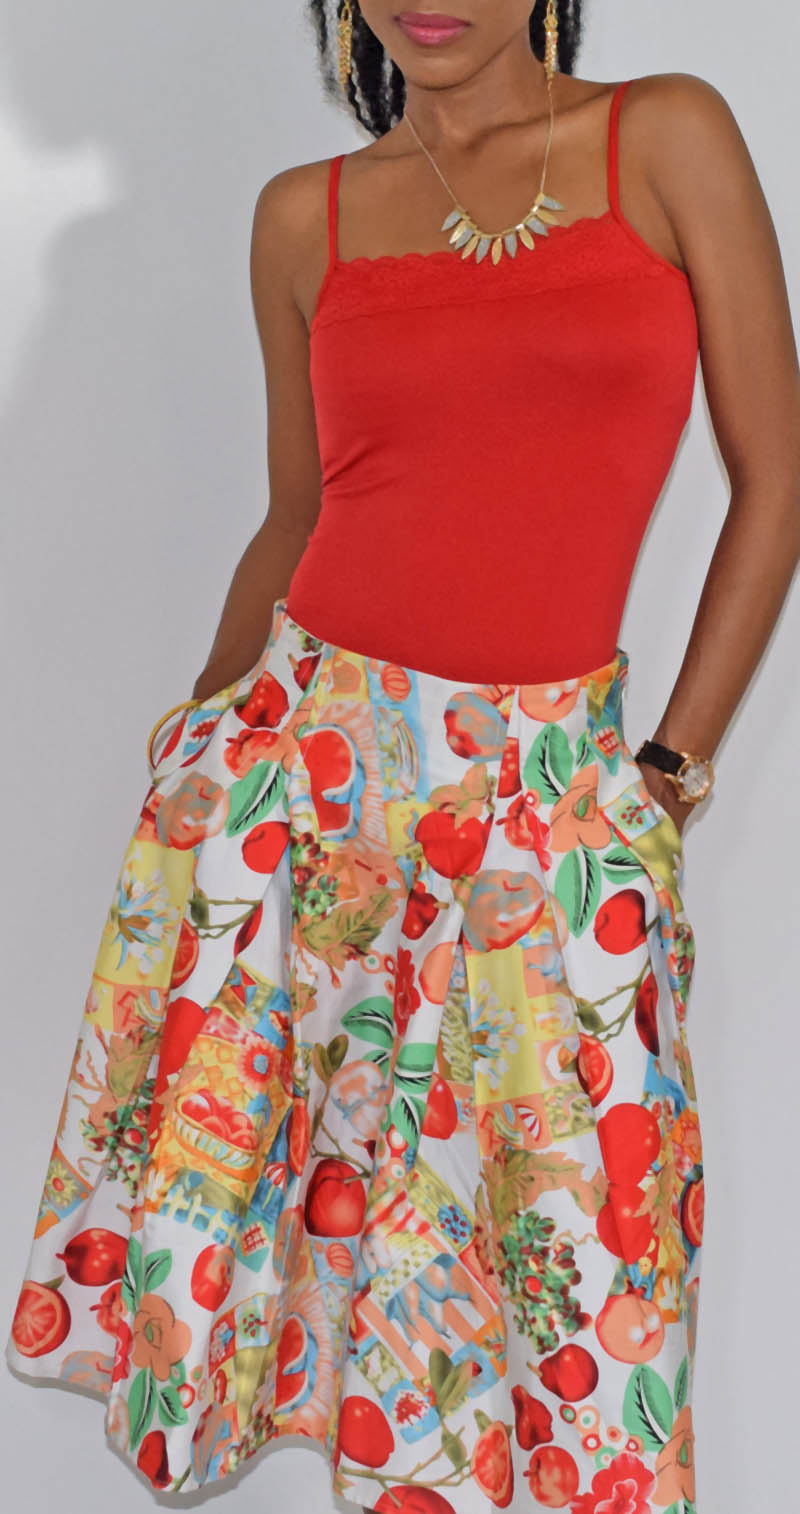 Grace Karin apples pomegranates fruits and flowers print skater skirt red lace detail tank top 2